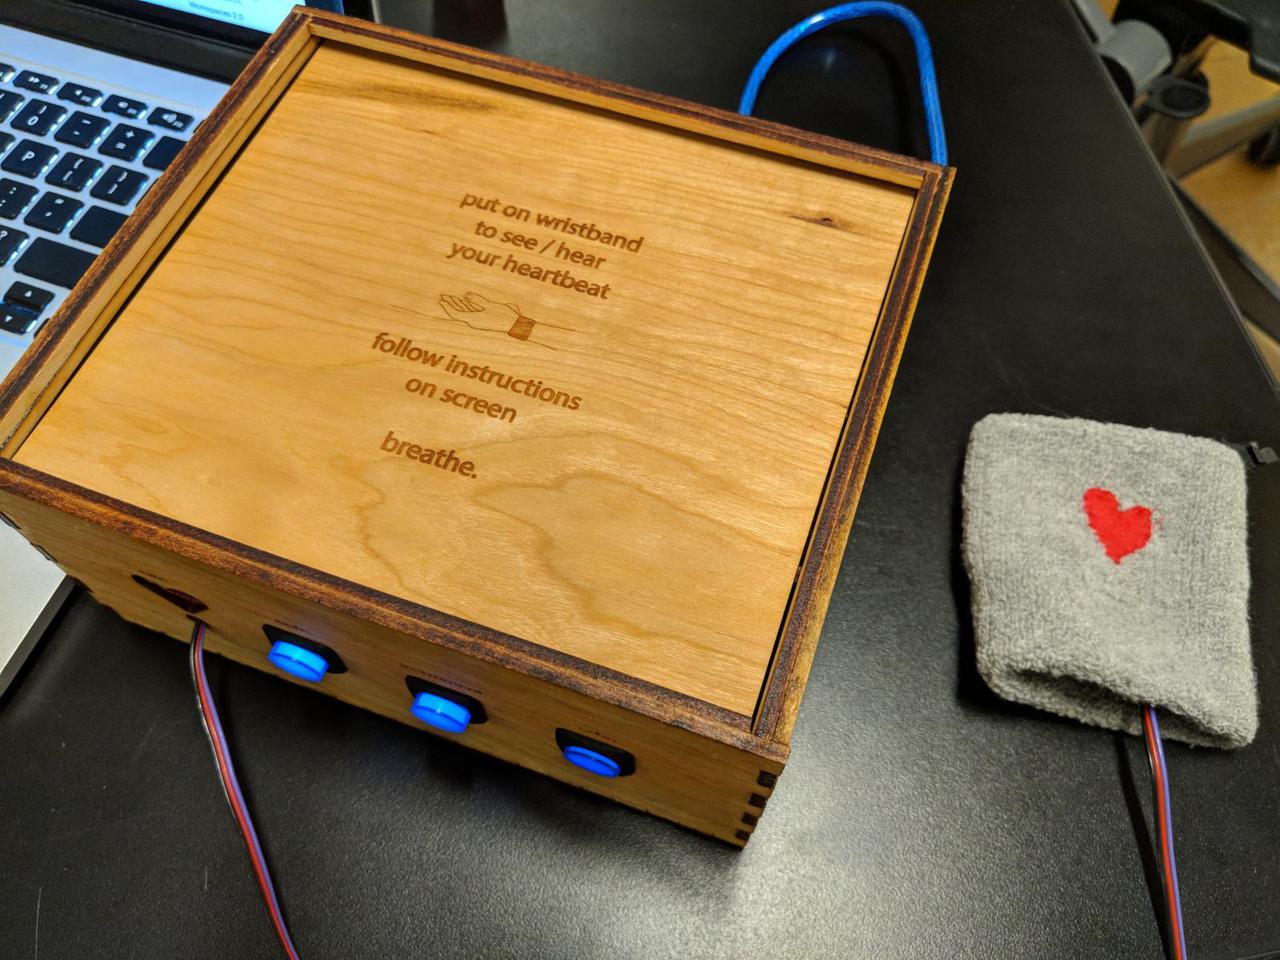 wooden box with 3 lit up buttons on front, and wire coming out of it leading to a pulse sensor attached to the inside of a wrist band.